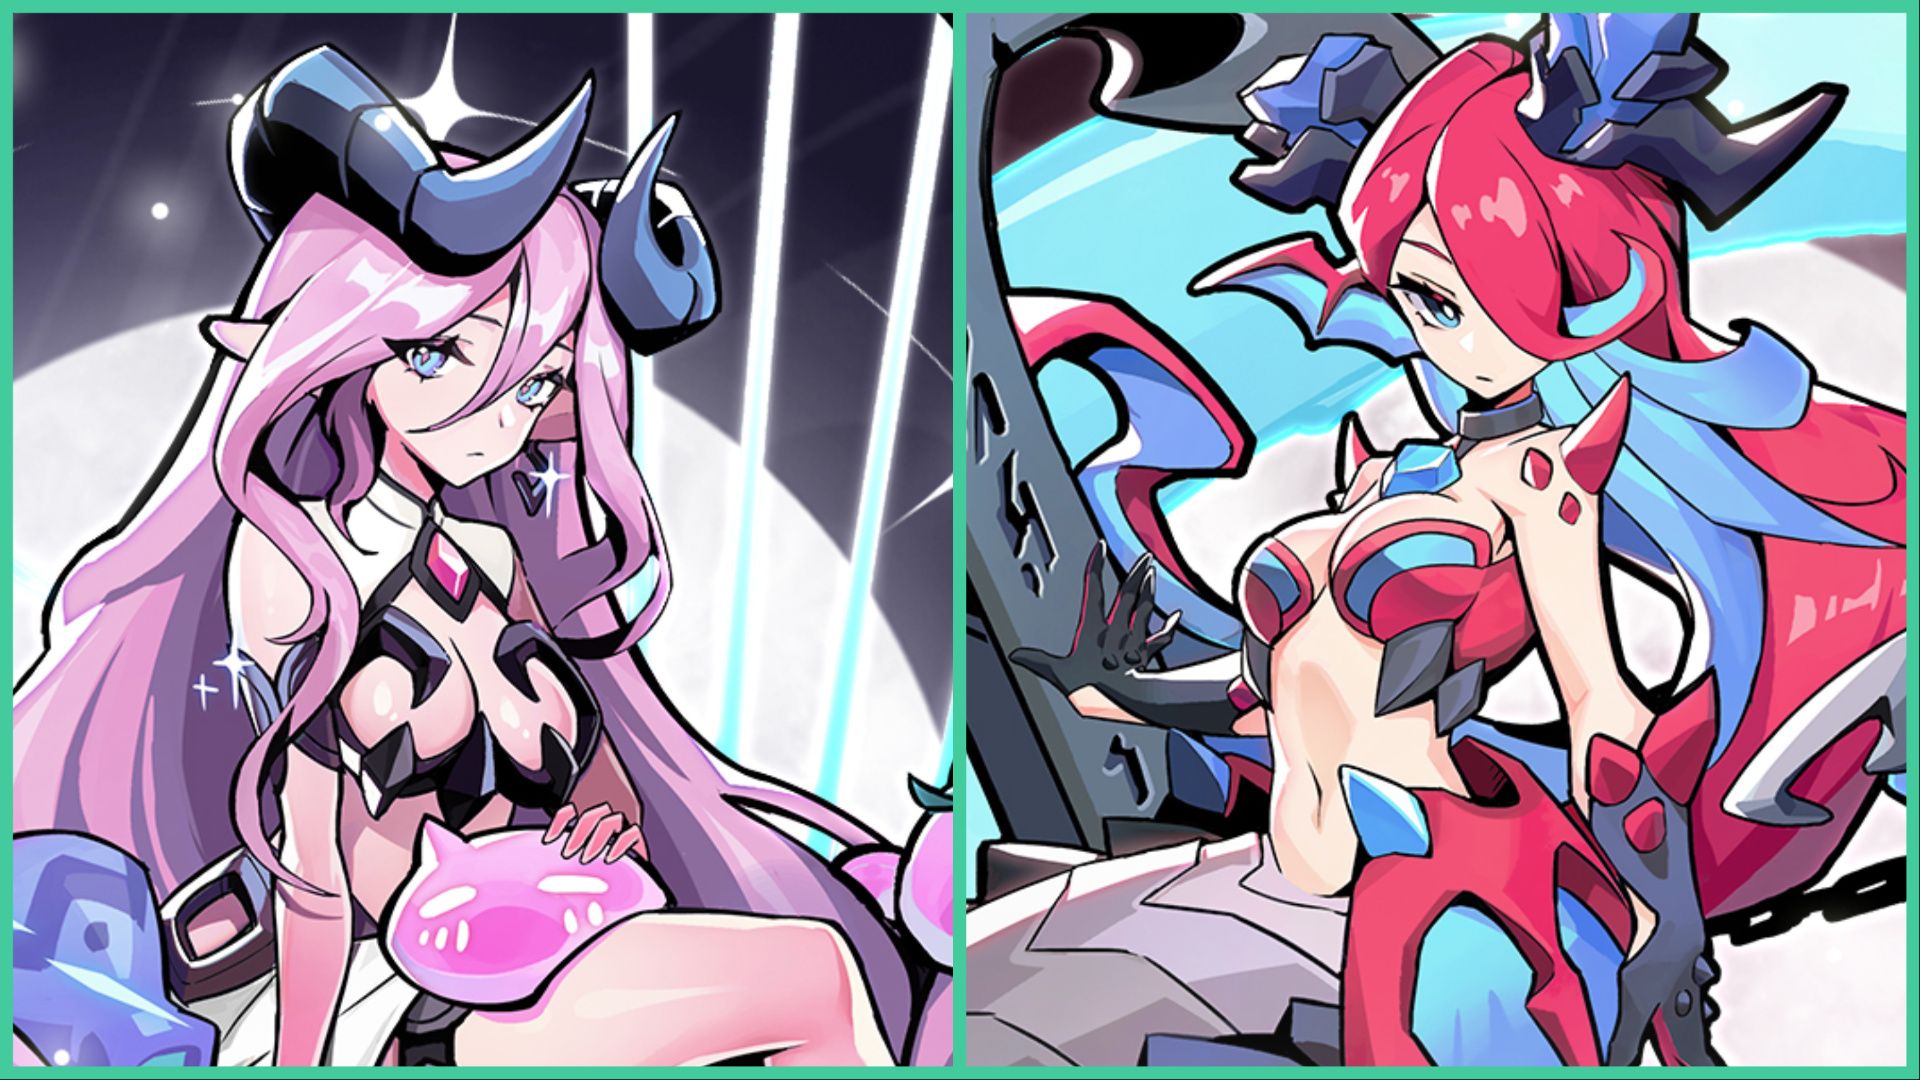 feature image for our monster never cry tier list, the image features 2 promo drawings of 2 obtainable female characters, the character on the left has devil horns and long pink hair while a cat shaped slime sits on her lap as she holds it, the character on the right is a mermaid-serpent hybrid, with a tail, scales, and horns as a metal anchor appears to her right with water behind her